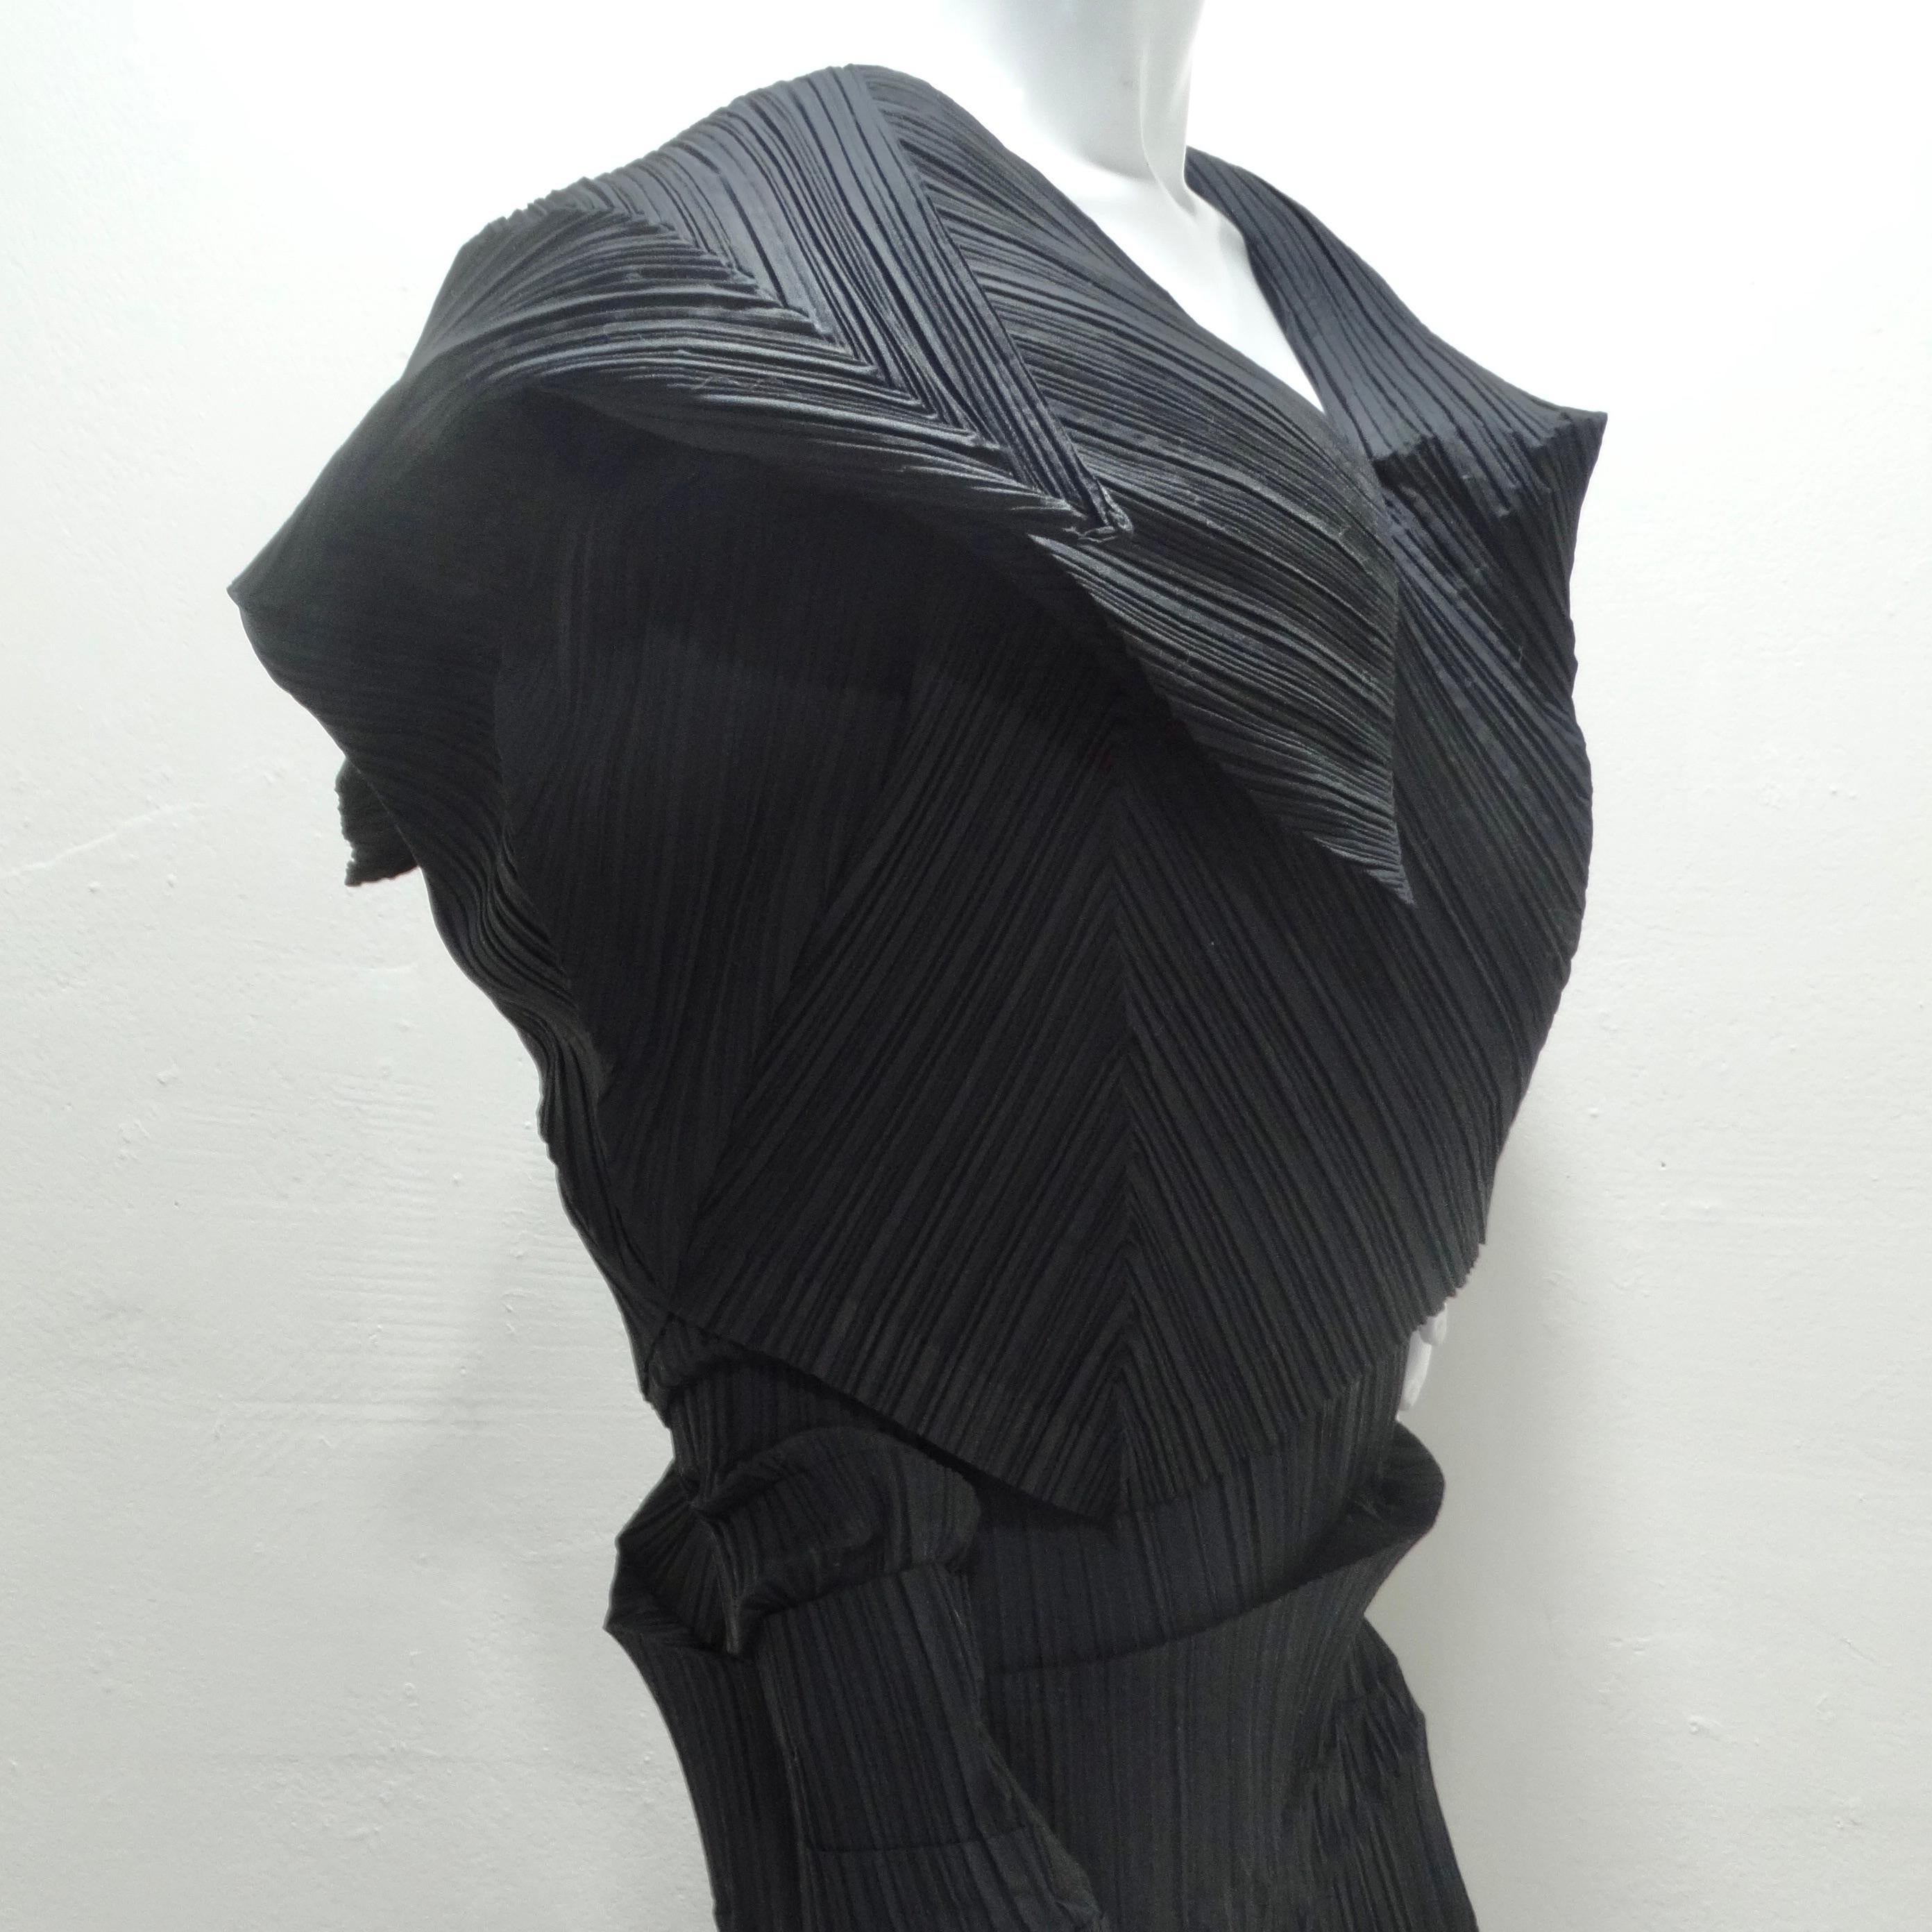 Issey Miyake 1989 Reverse Pleats Black Sculptural Museum Quality Dress For Sale 2